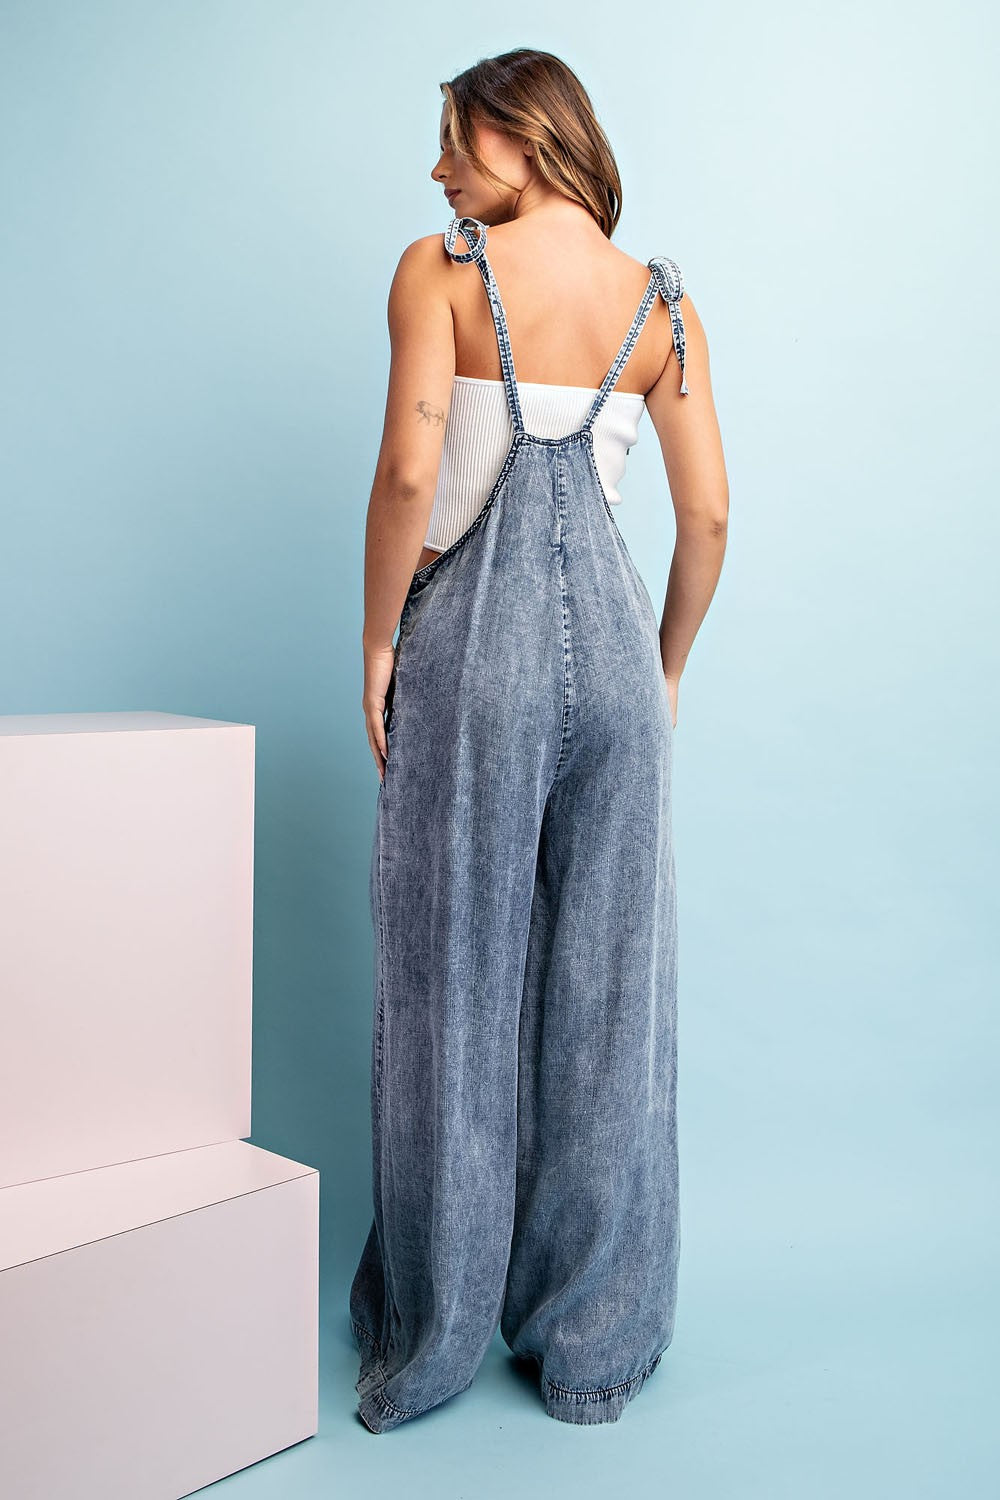 Denim Acid Washed Overalls with Tied Straps